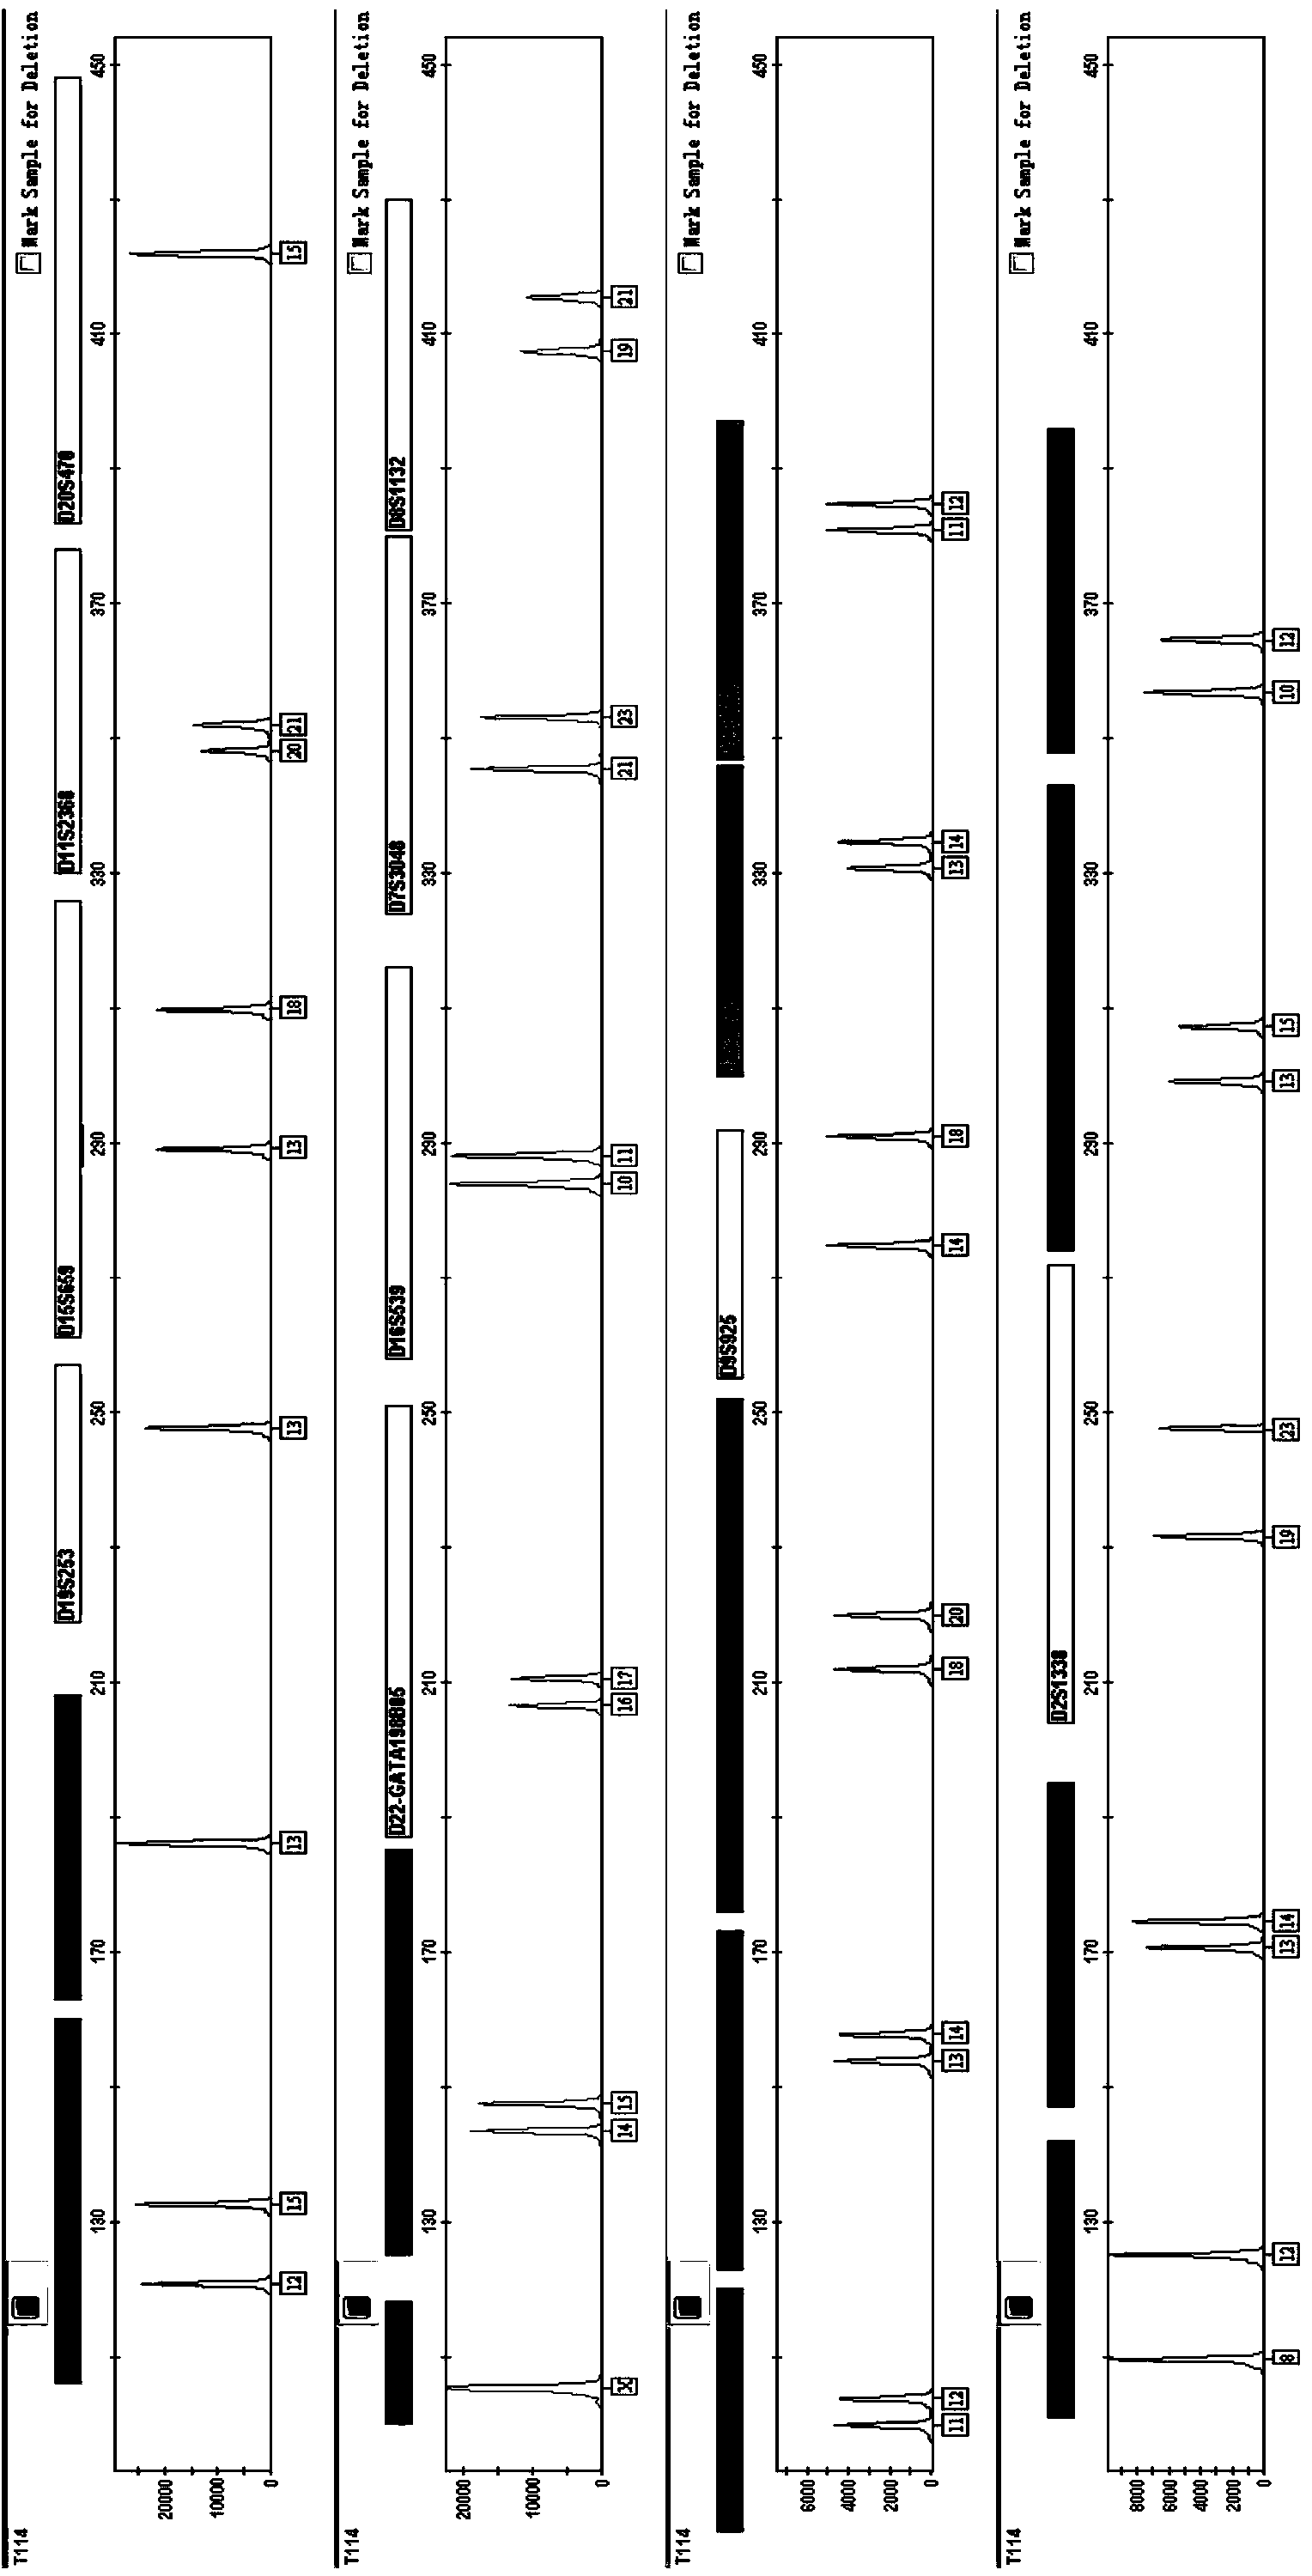 Composite amplification system of 23 short tandem repeat sequences and a kit